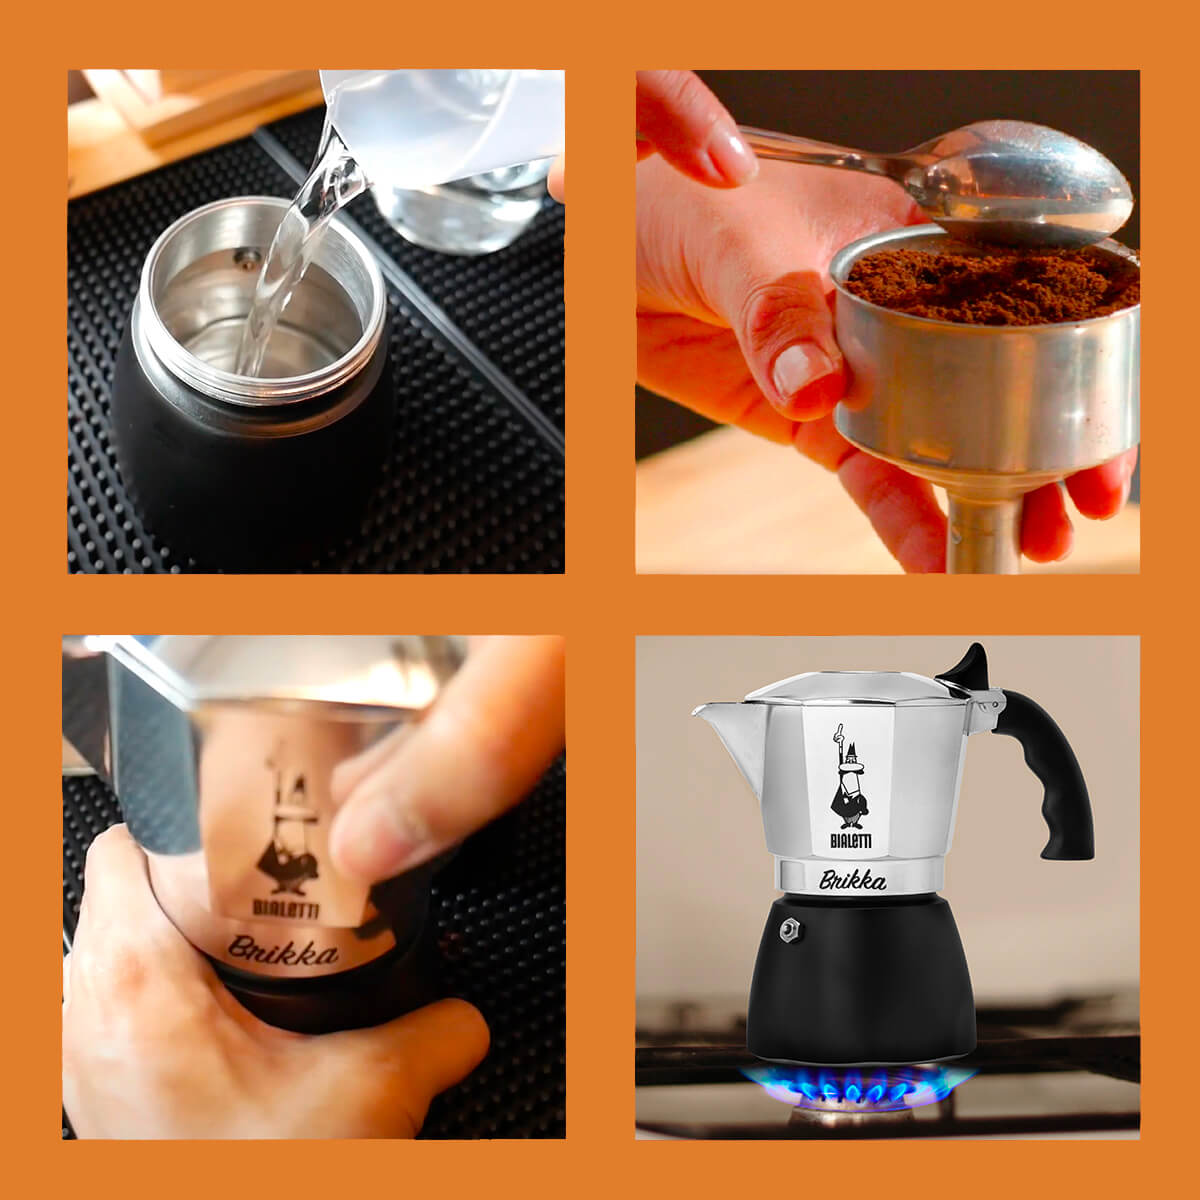 how to make coffee with Bialetti Brikka stovetop coffee maker